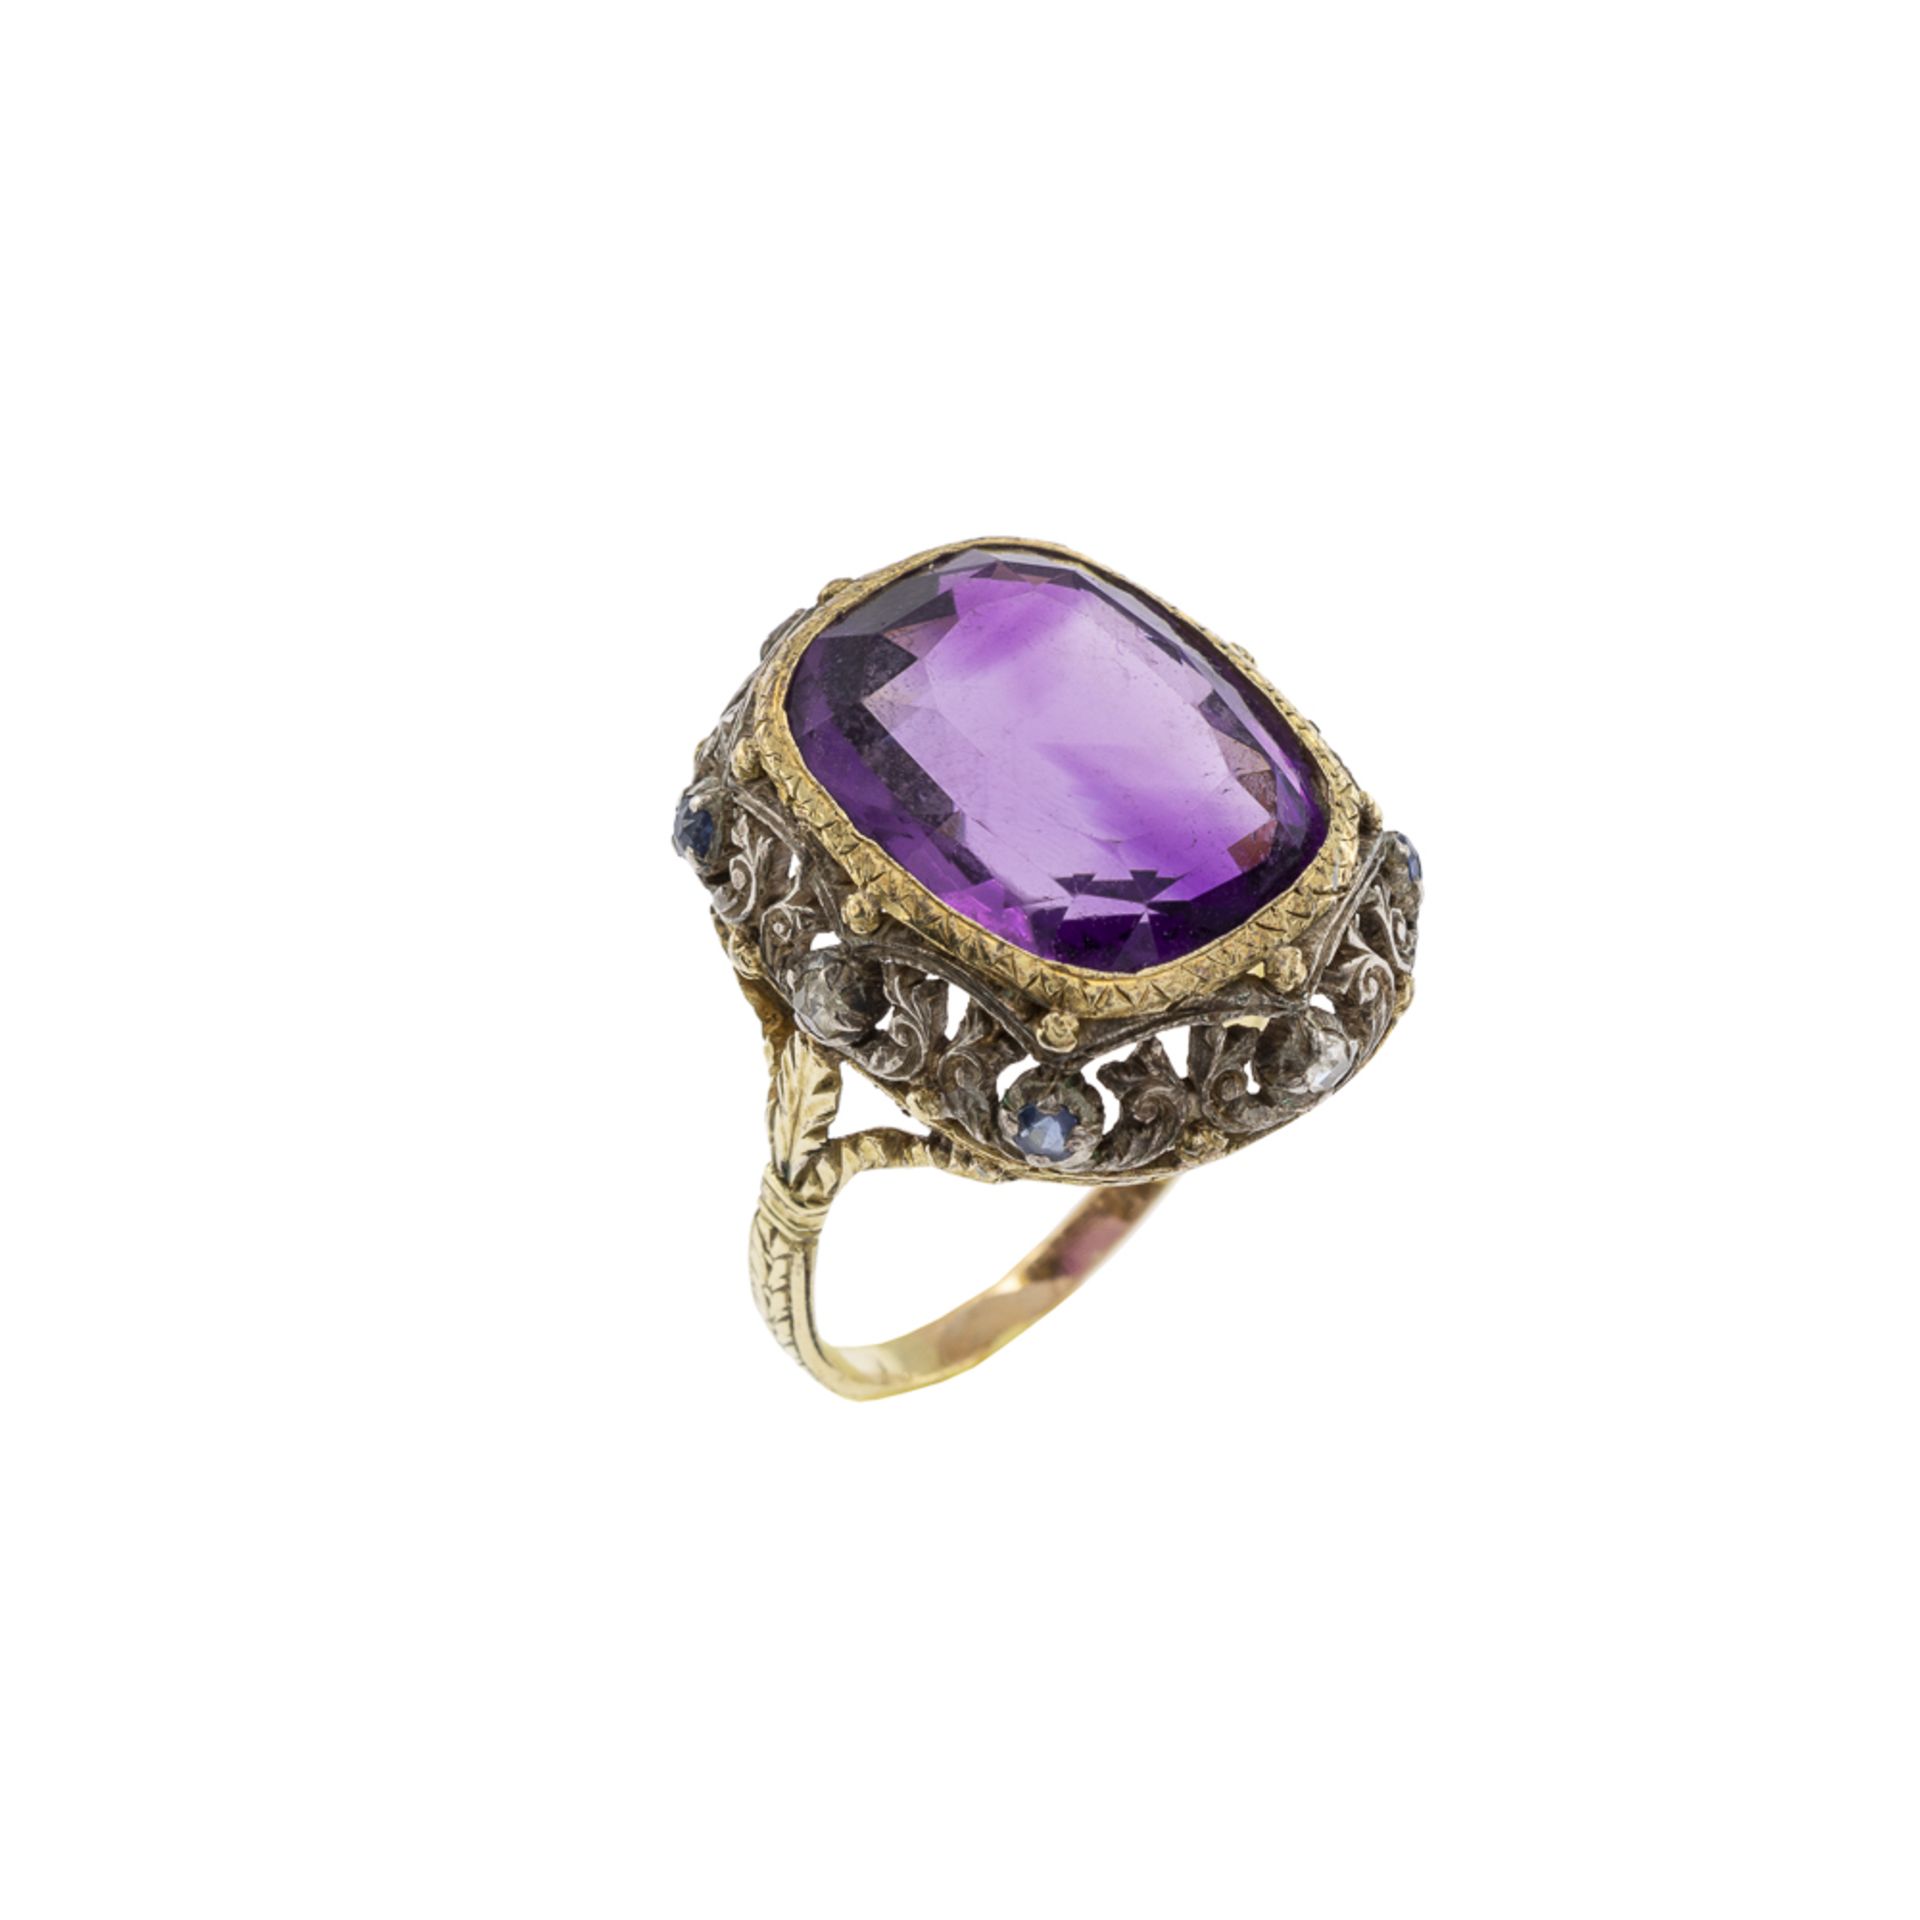 Antique yellow gold and silver with amethyst ring